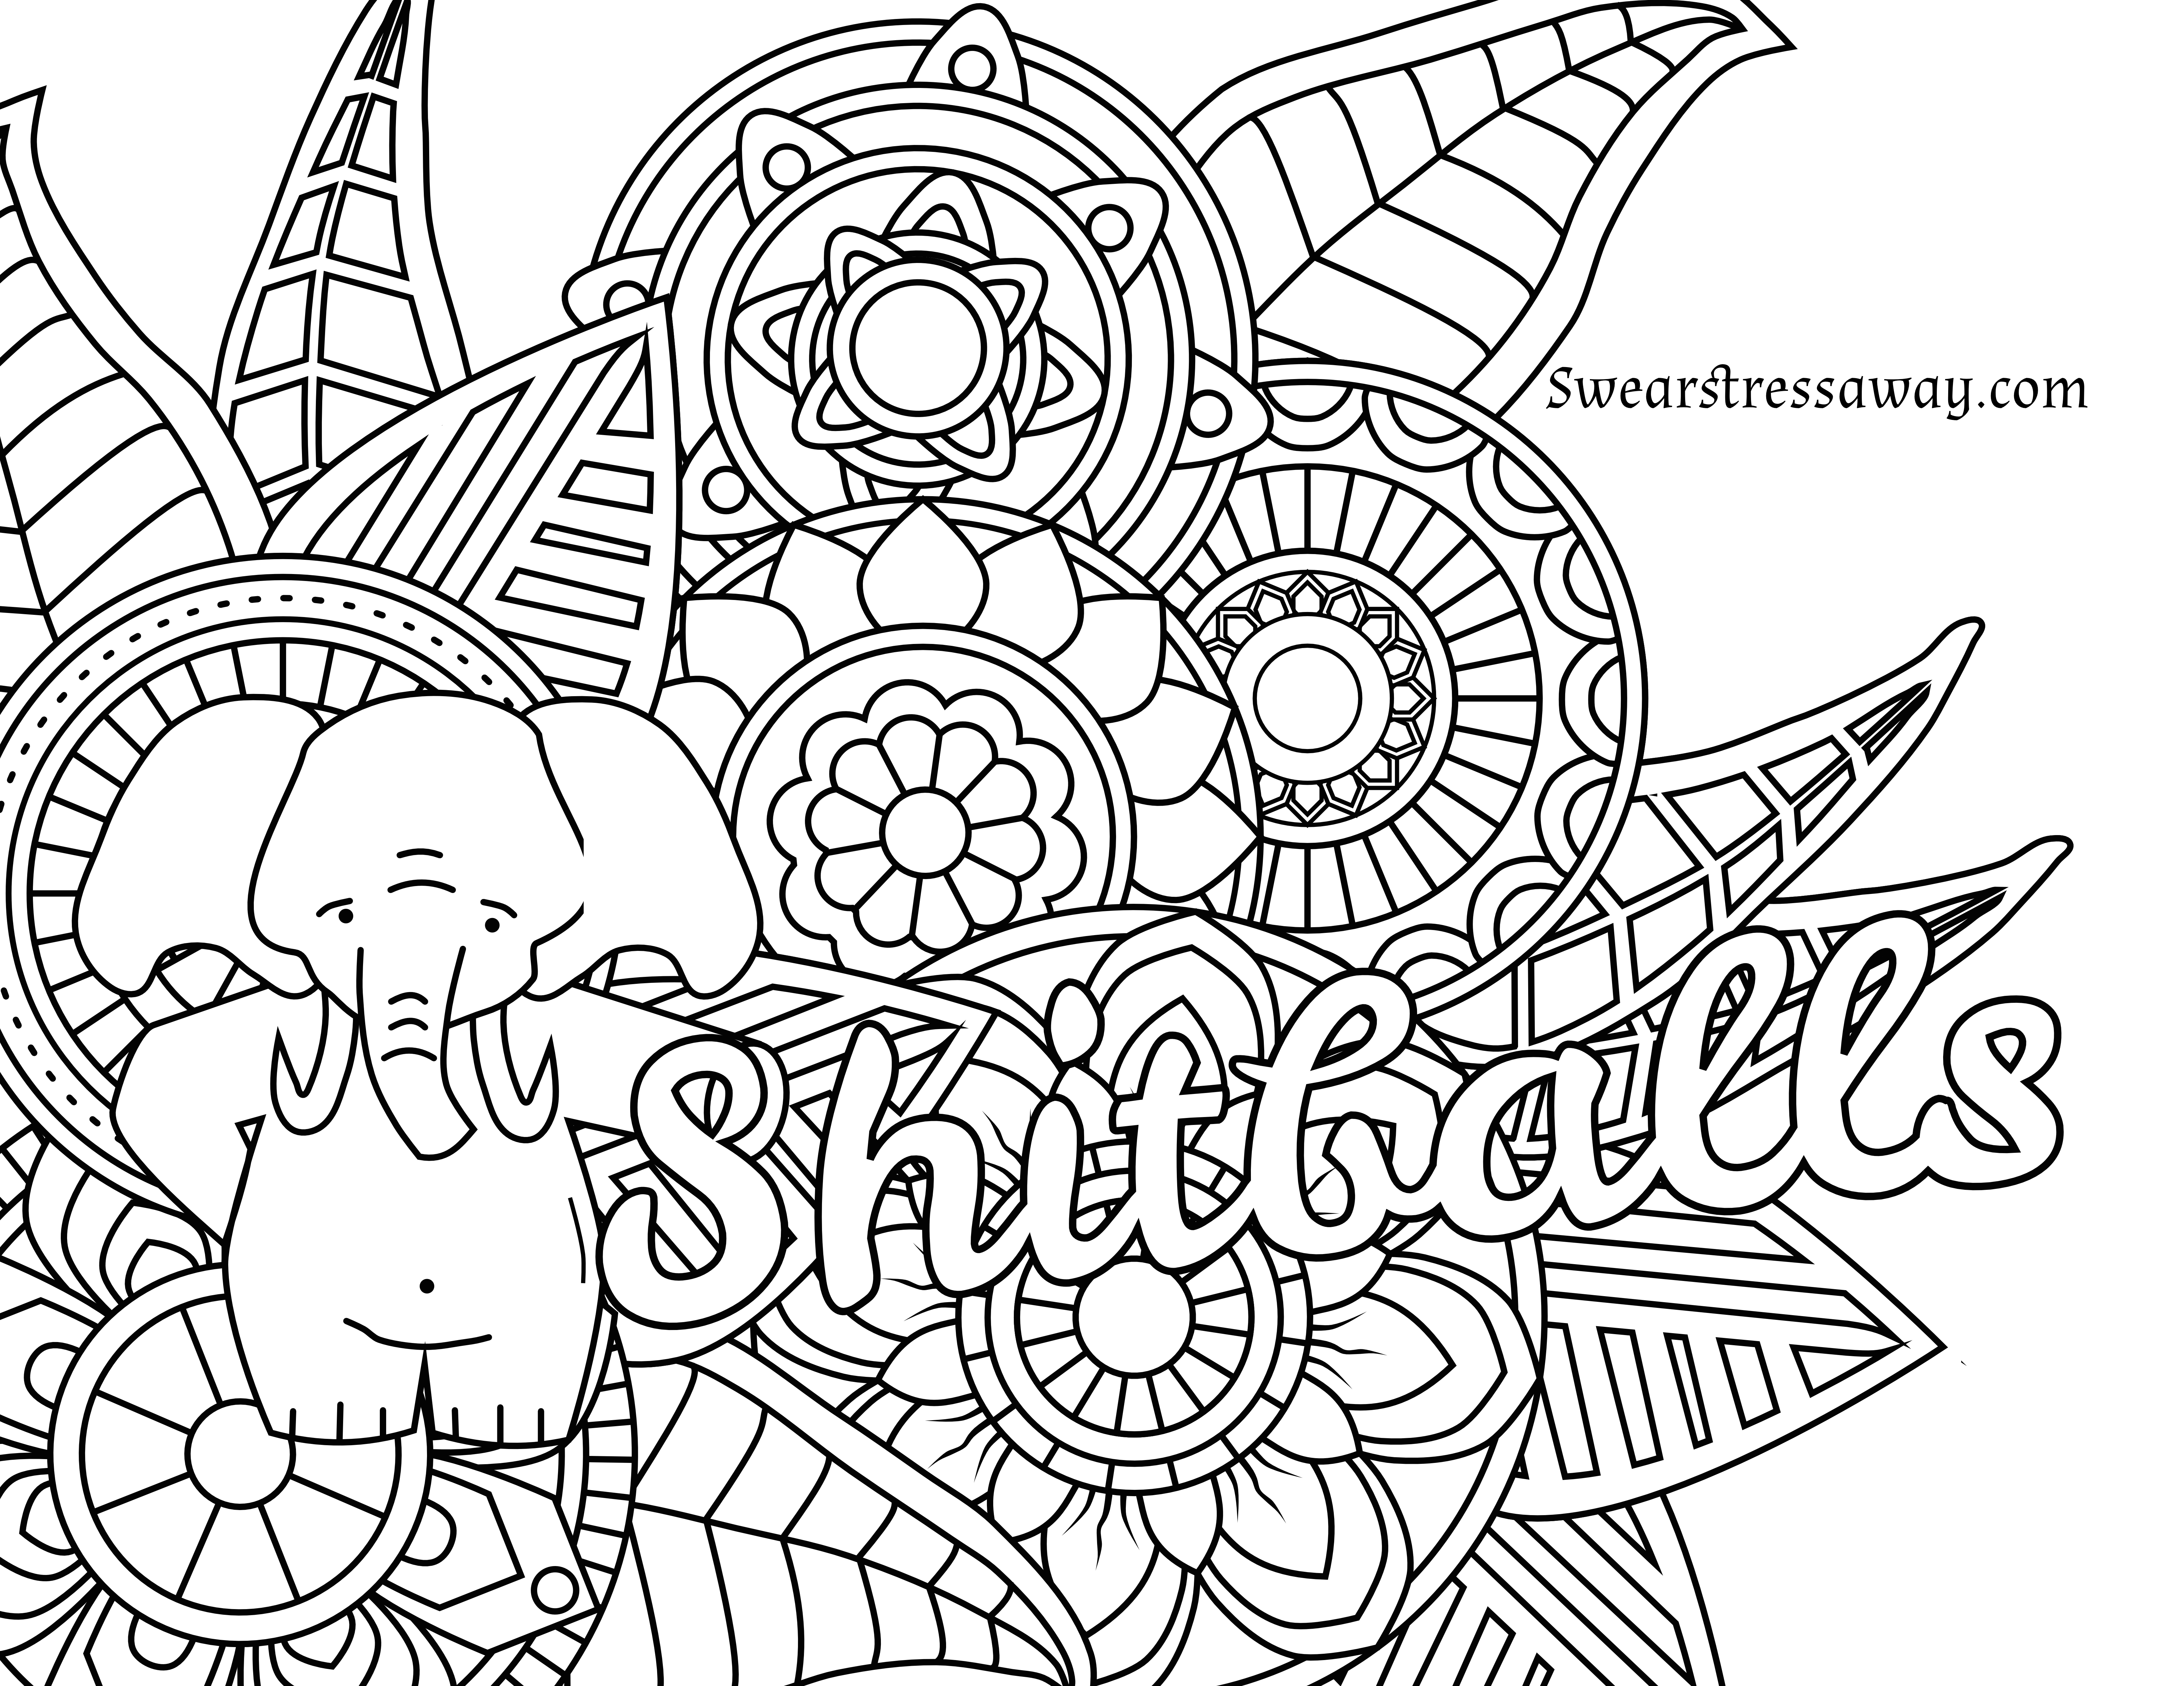 Free Printable Coloring Pages With Quotes Coloring Ideas Coloring Pages Free Printable Adultsuotes For